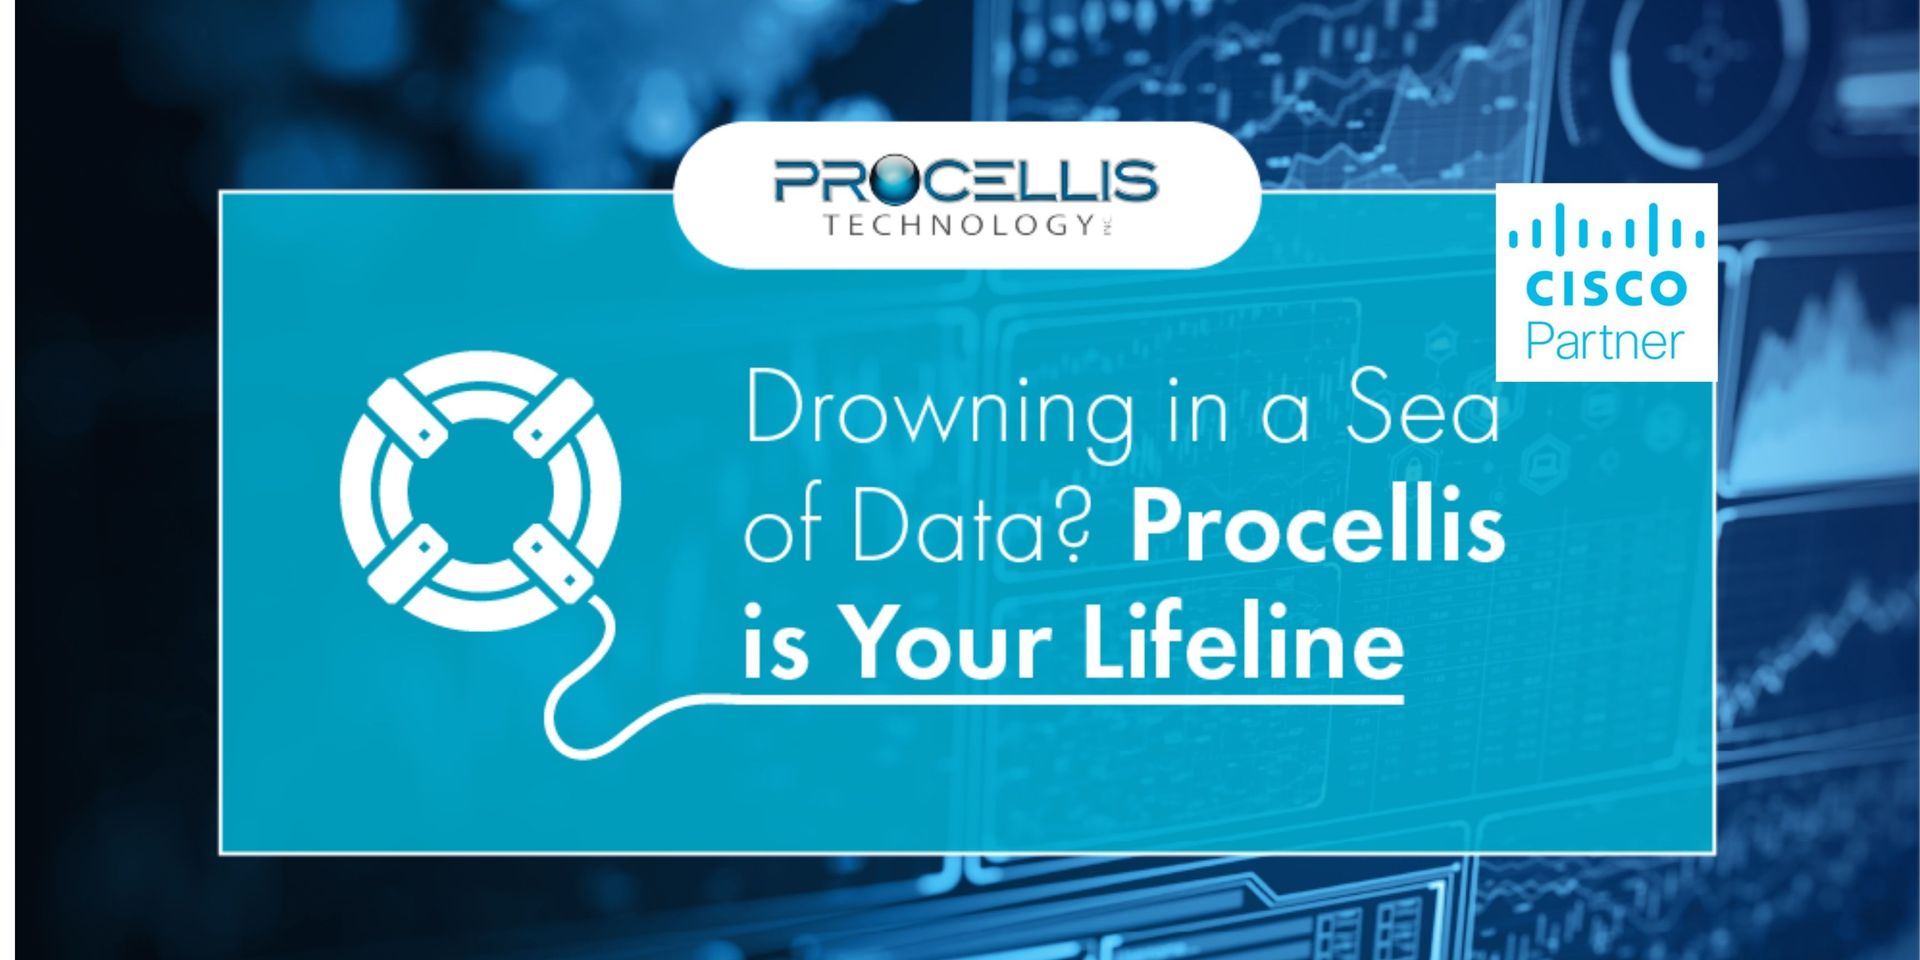 Drowning in Data?  Procellis is your lifeline